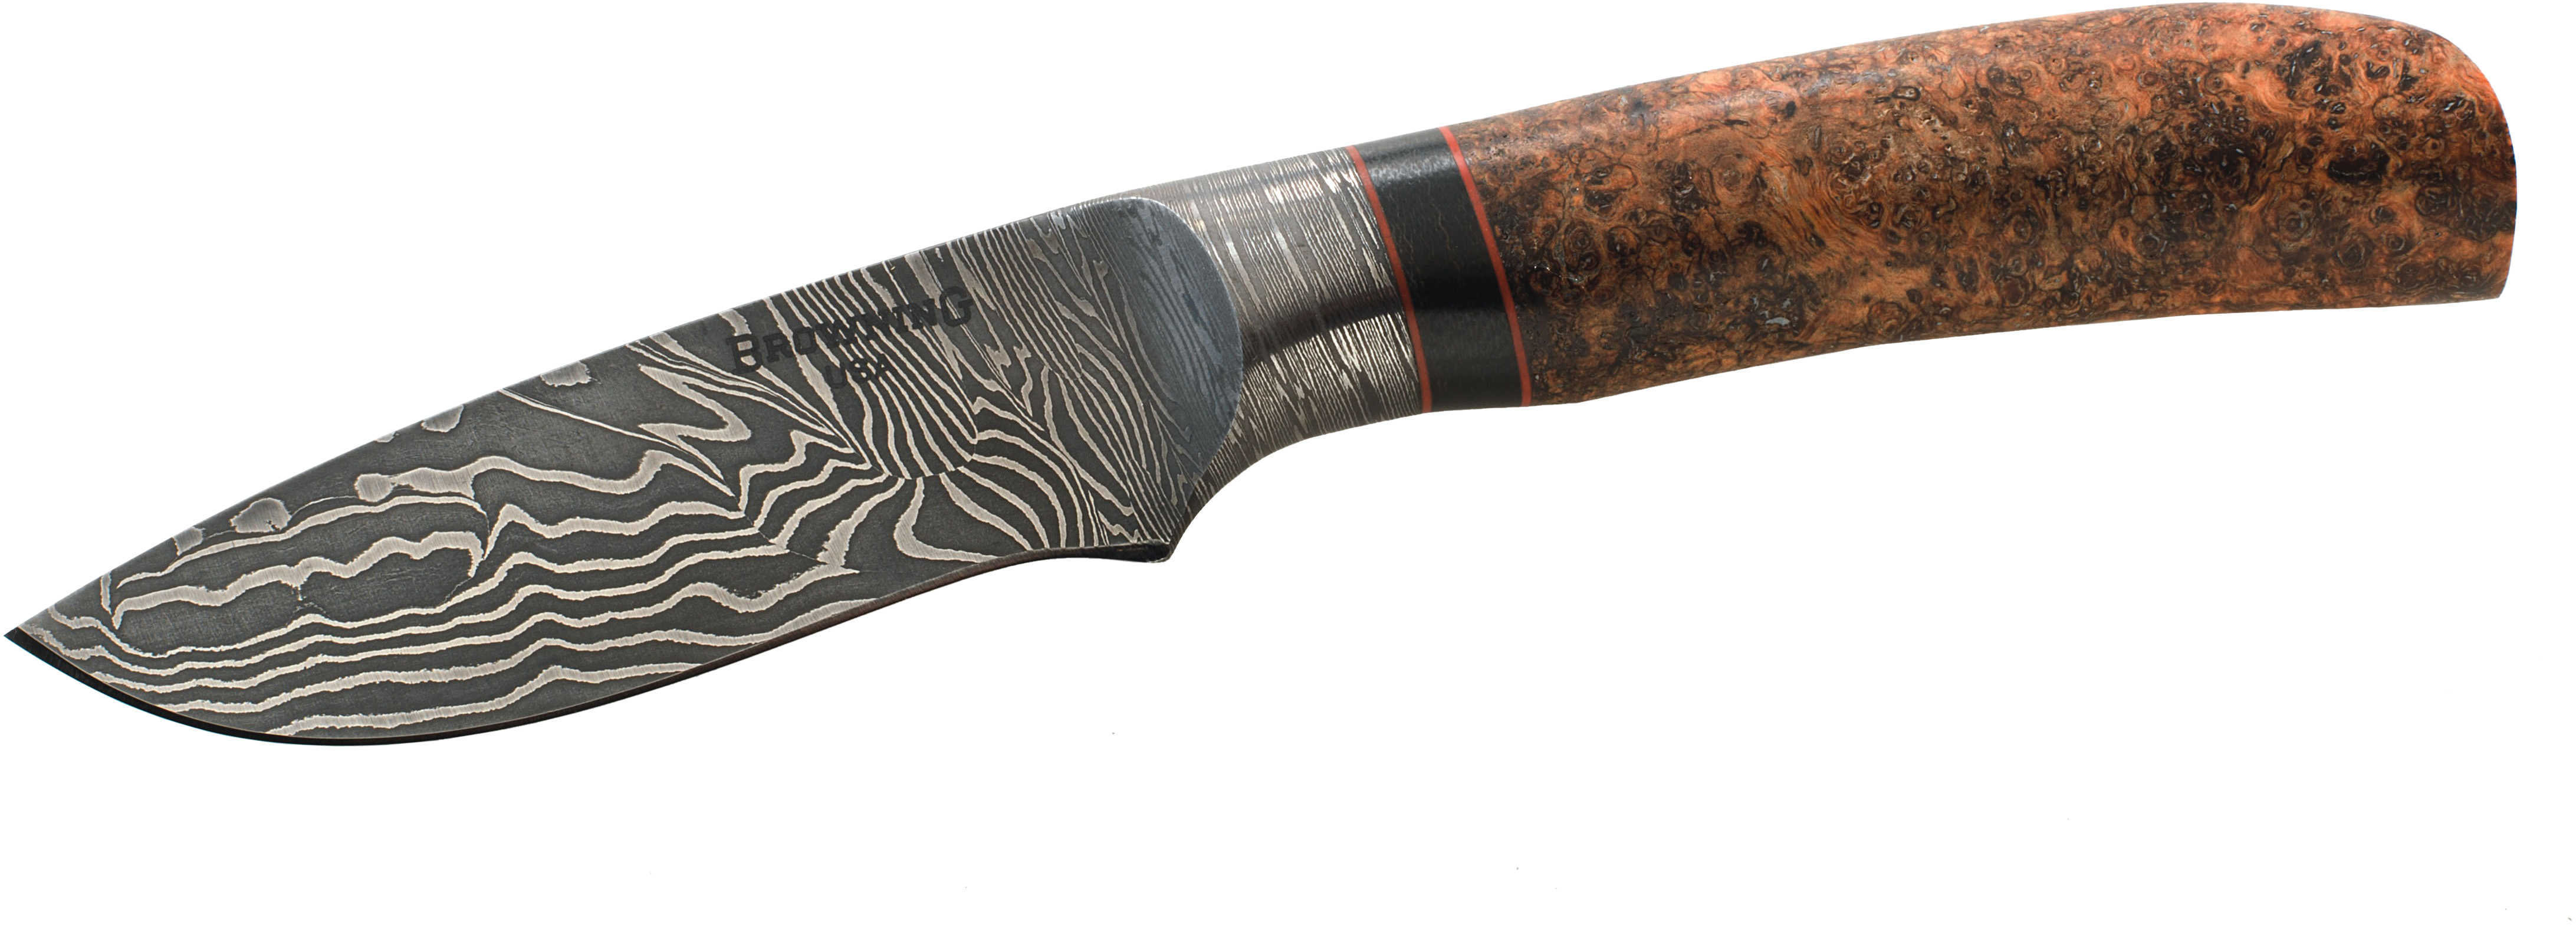 Browning Knife, Storm Front Big Belly Md: 322218